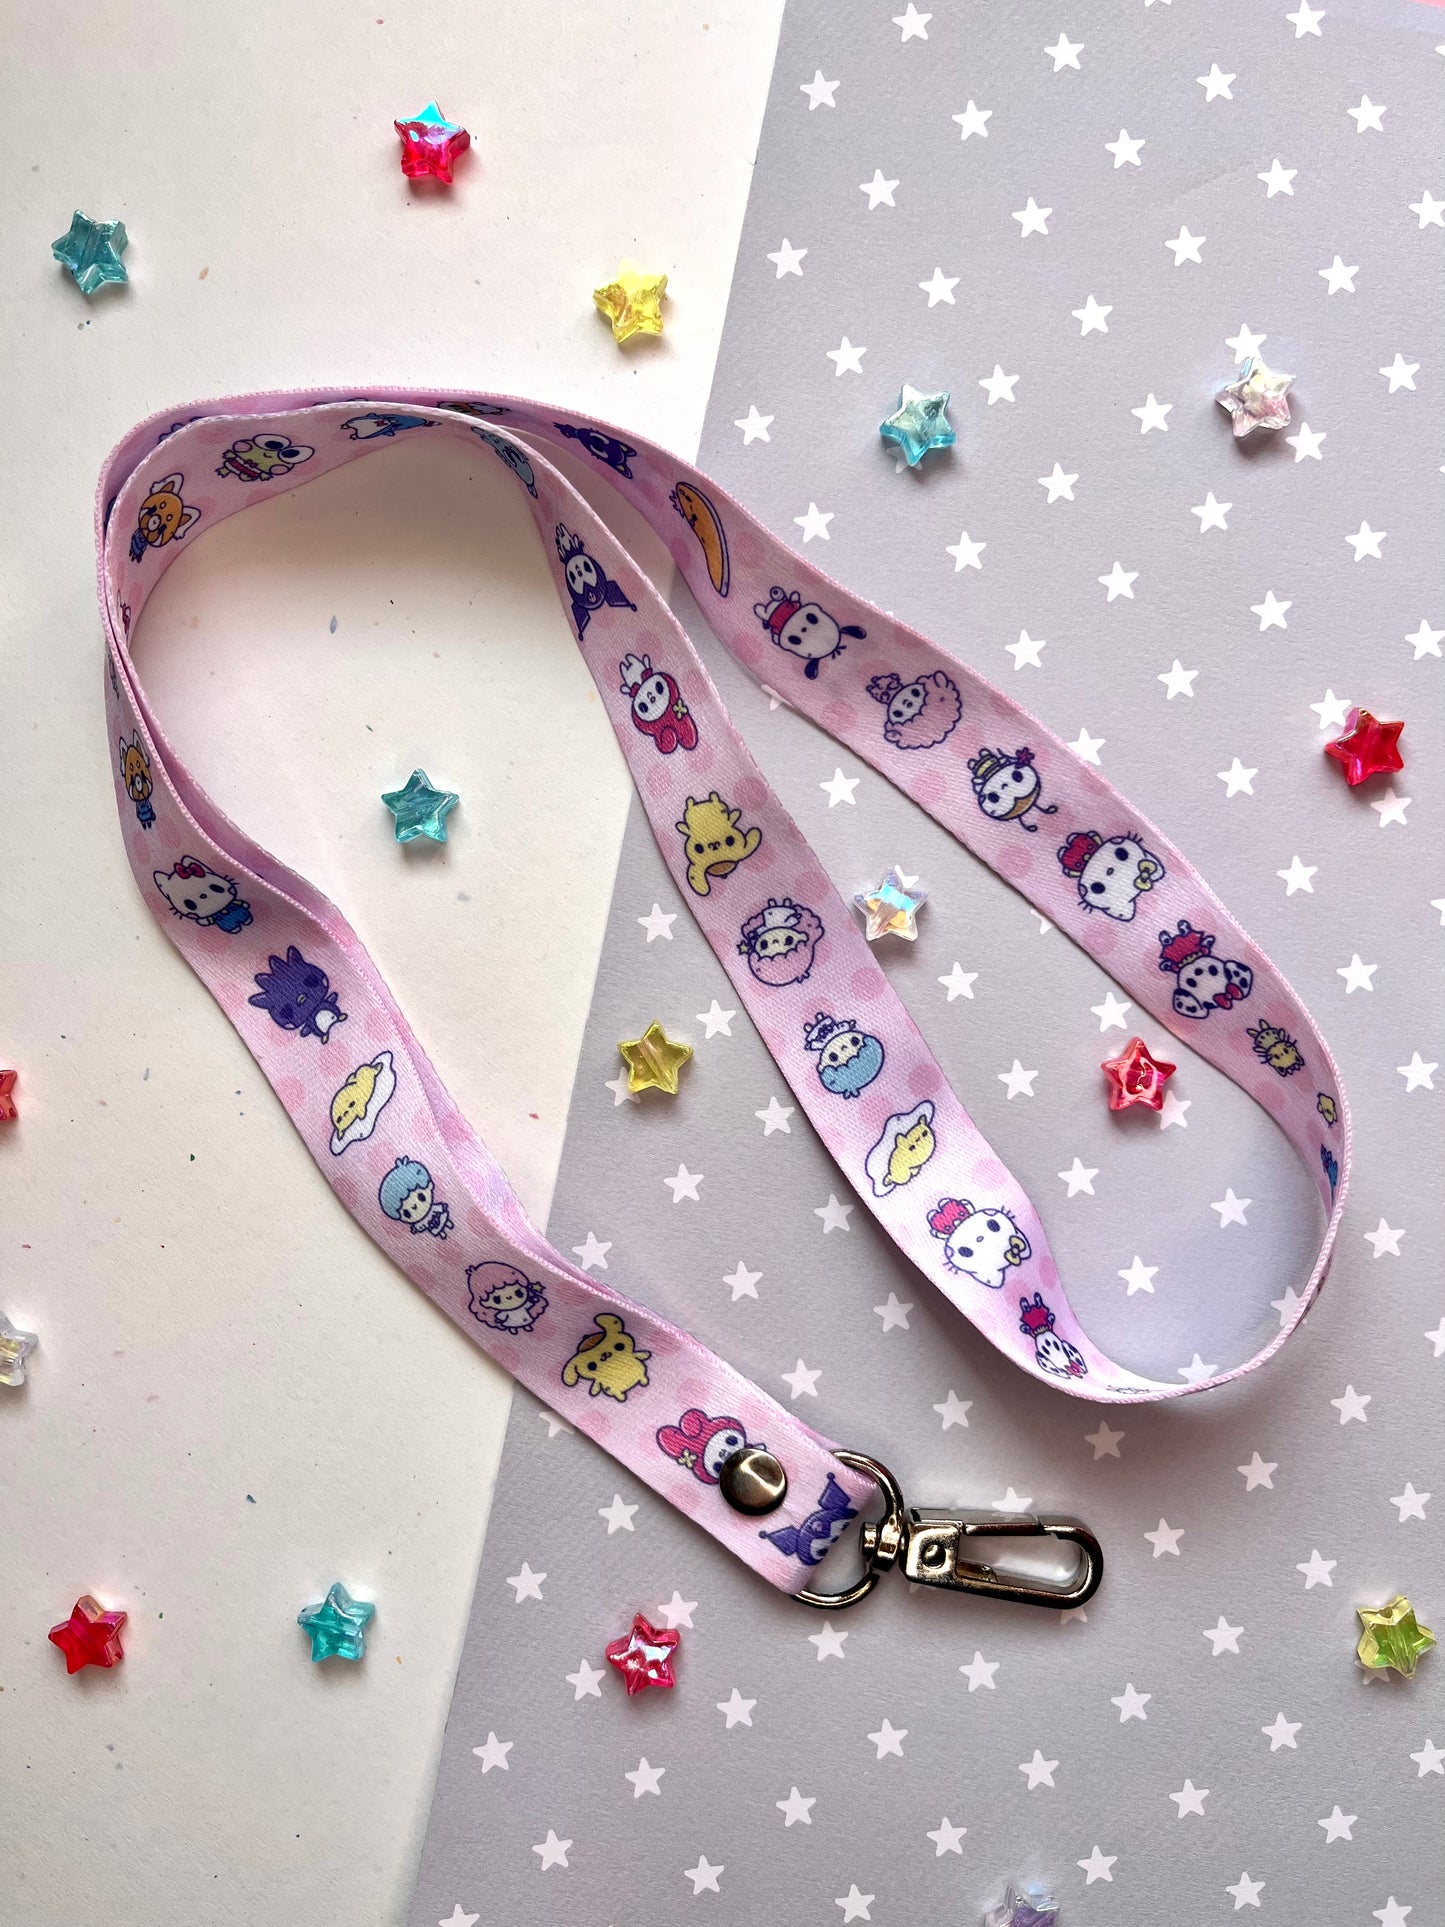 Kitty and Friends Lanyard